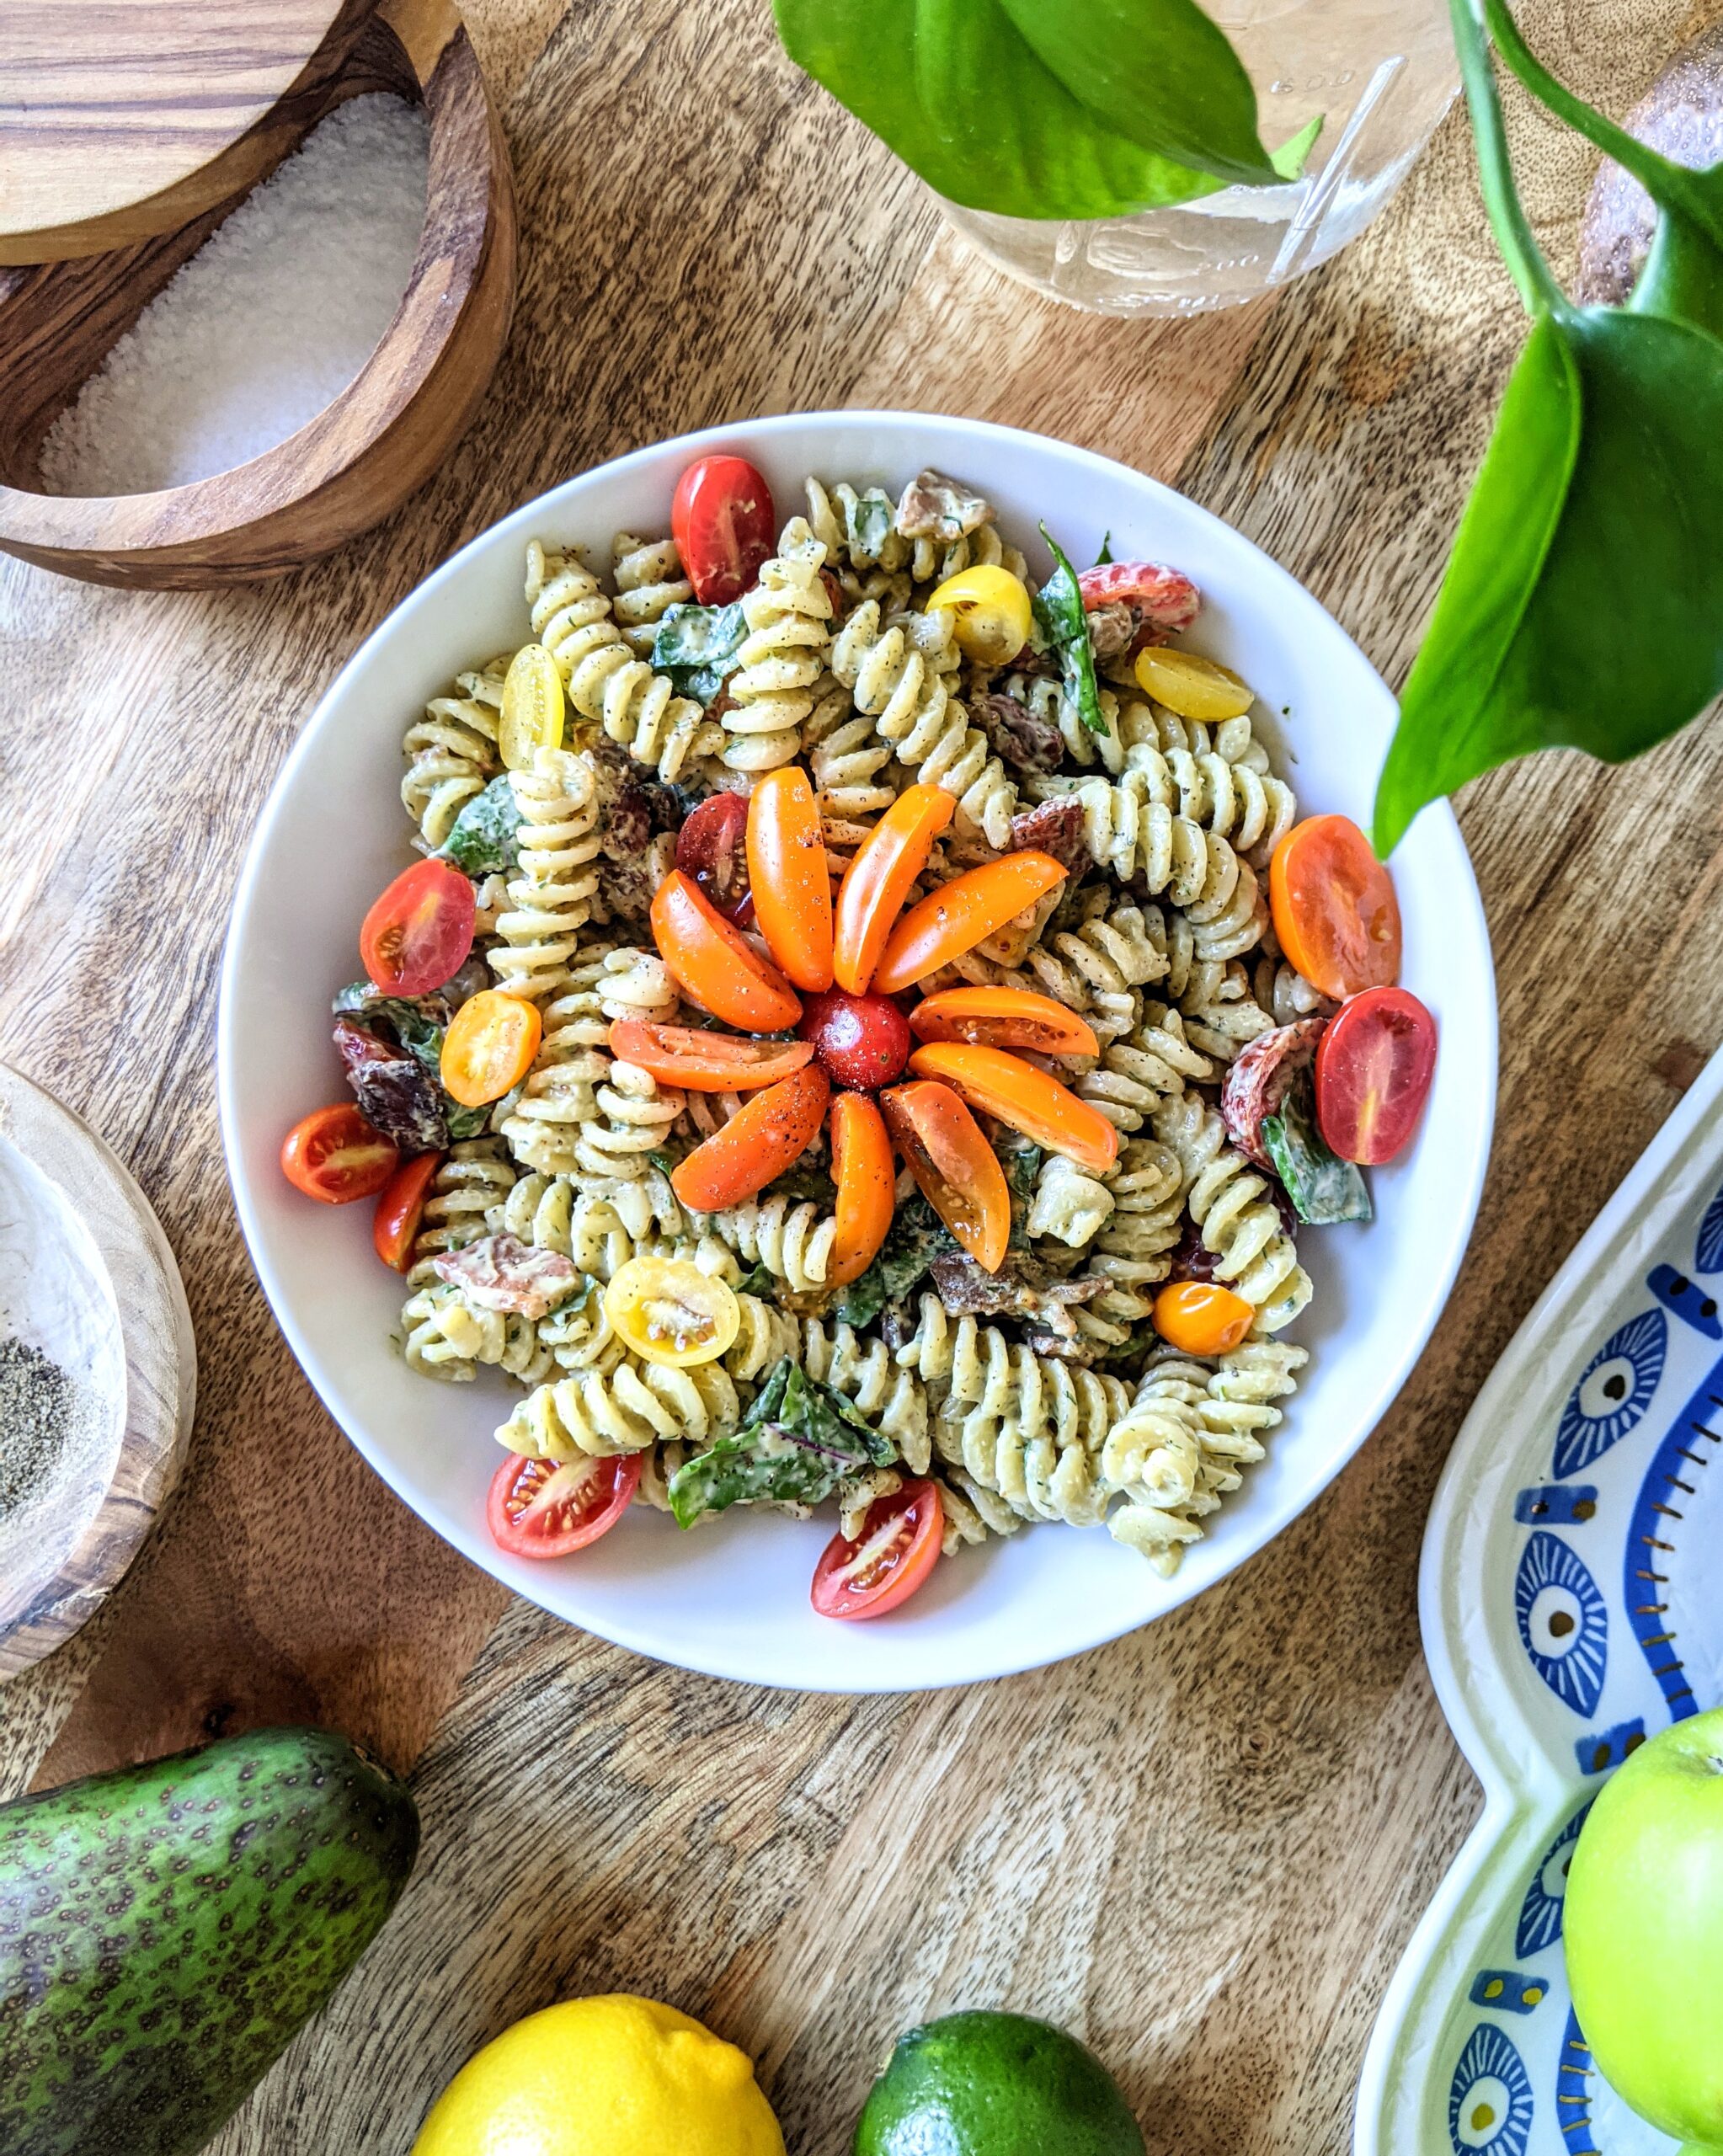 A colorful bowl of BLT rotini pasta salad tossed with avocado buttermilk ranch. Garnished with an orange, red, and yellow flowers made of small variety tomatoes.